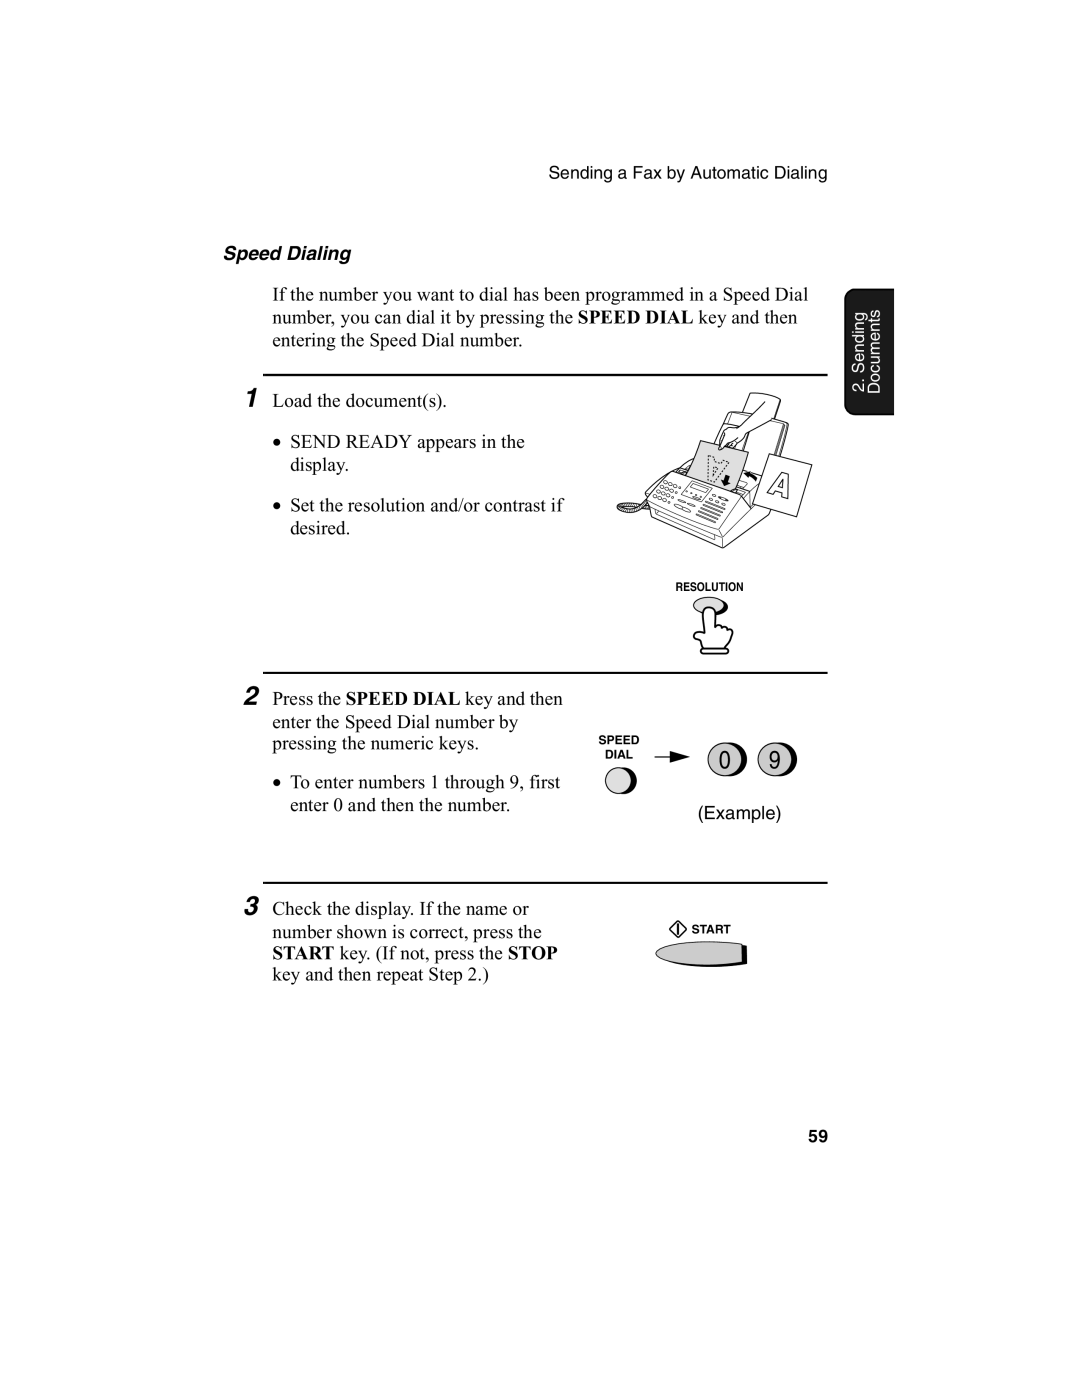 Sharp FO-2970M operation manual Speed Dialing 